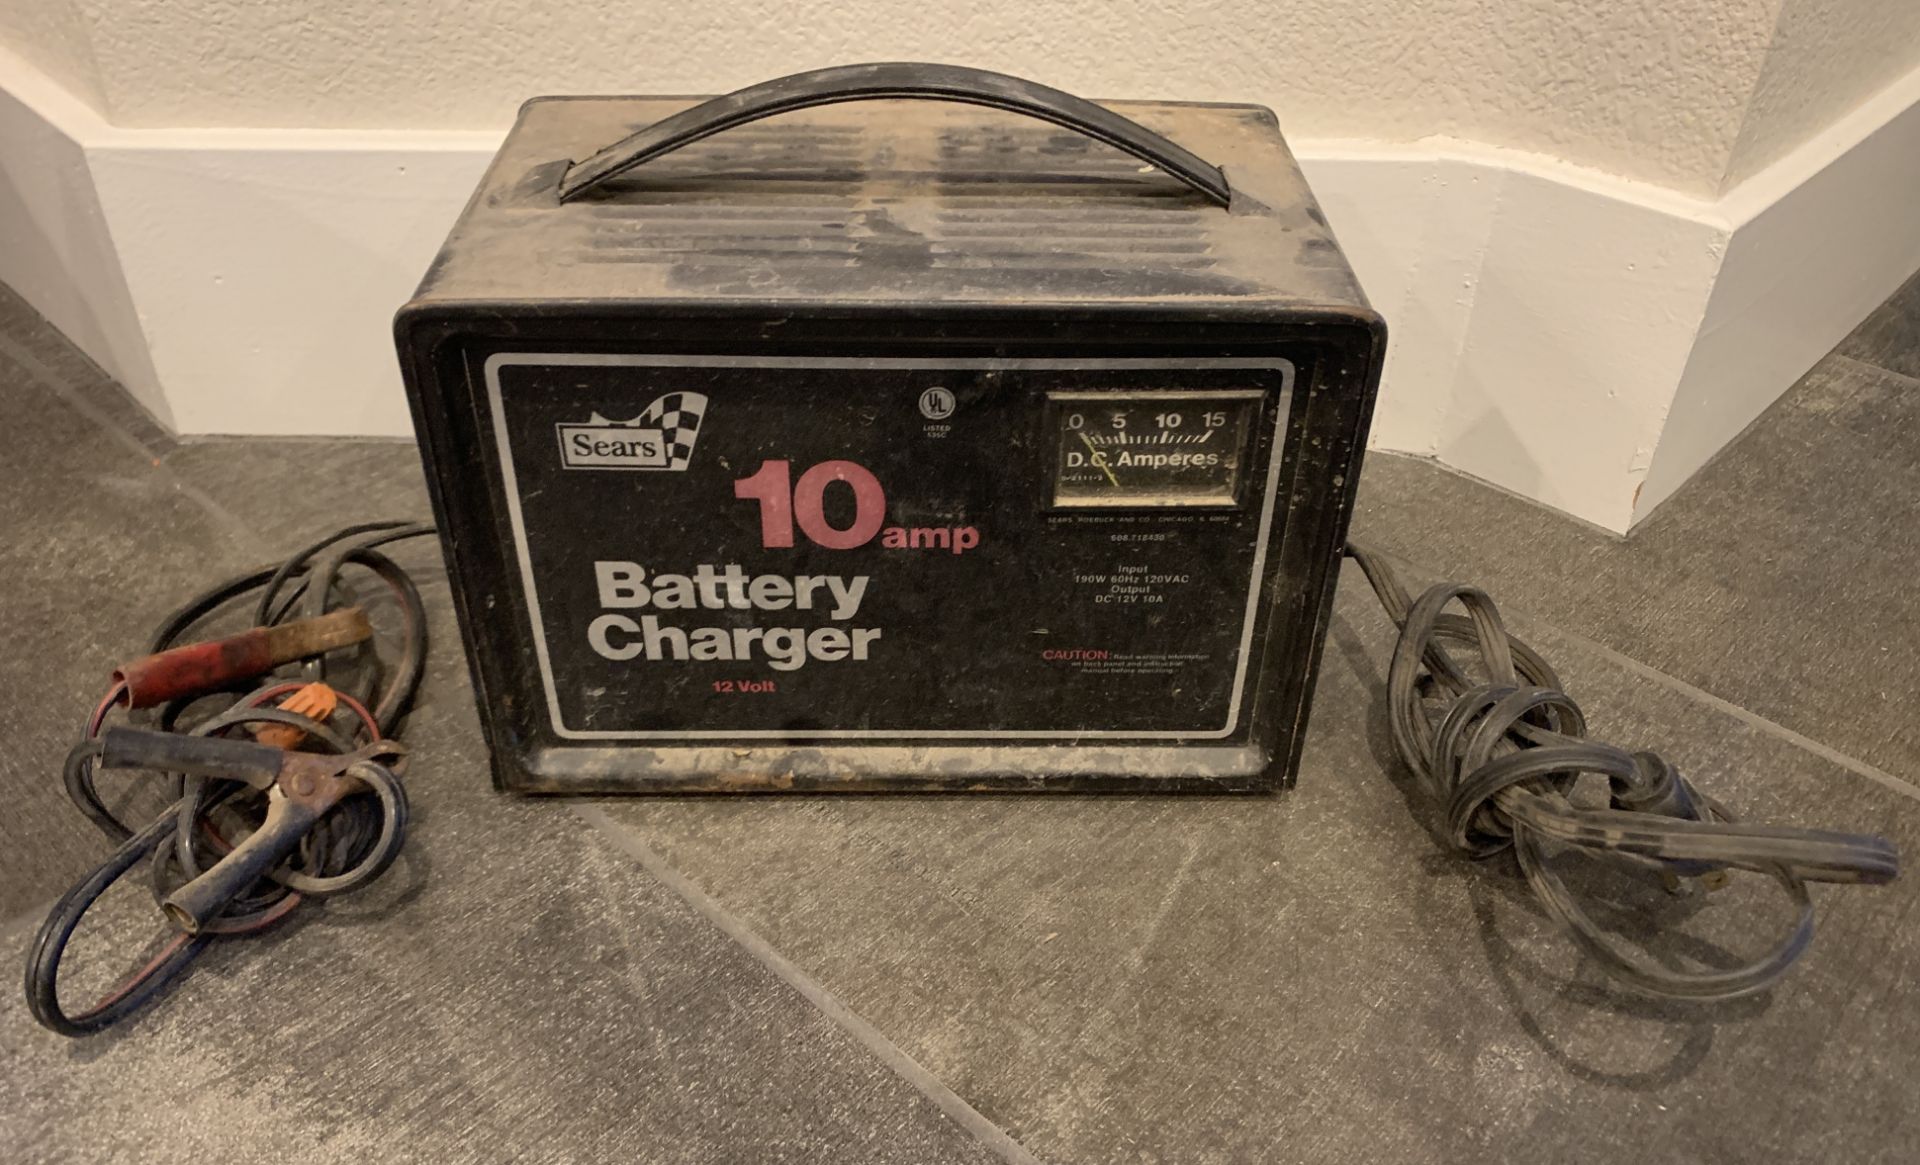 SEARS 10 AMP BATTERY CHARGER